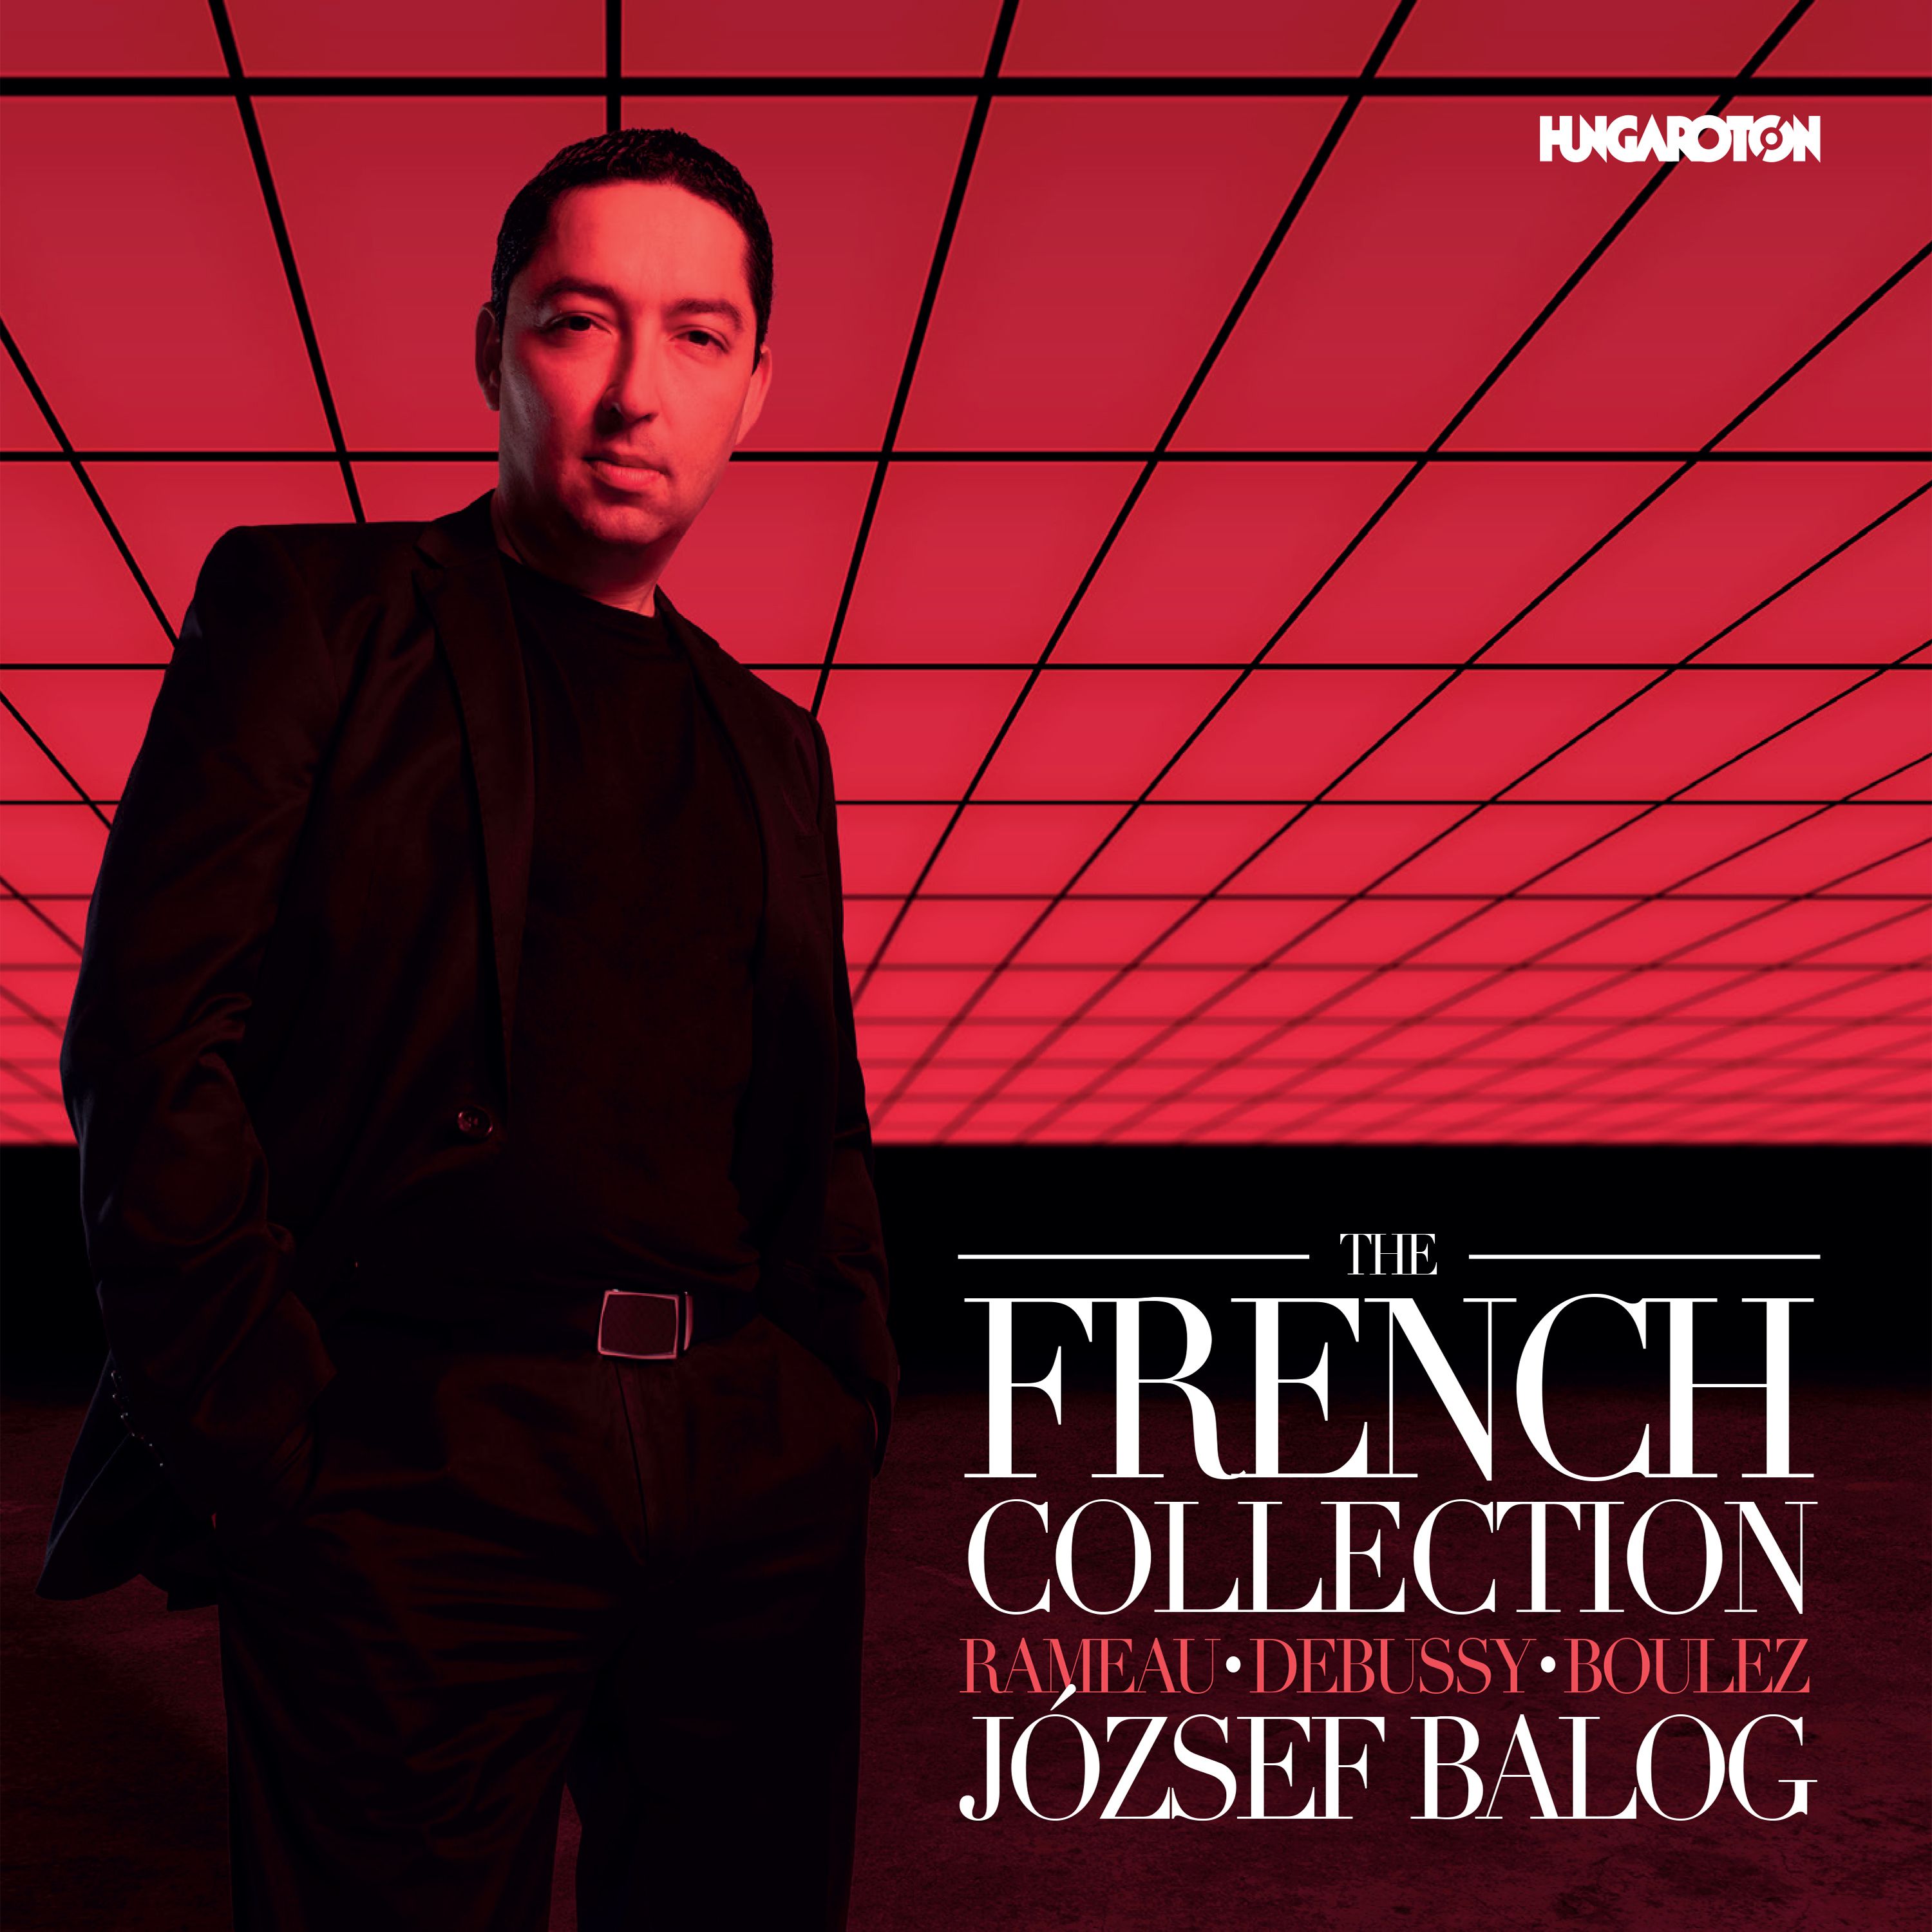 RAMEAU, DEBUSSY, BOULEZ - THE FRENCH COLLECTION CD BALOG